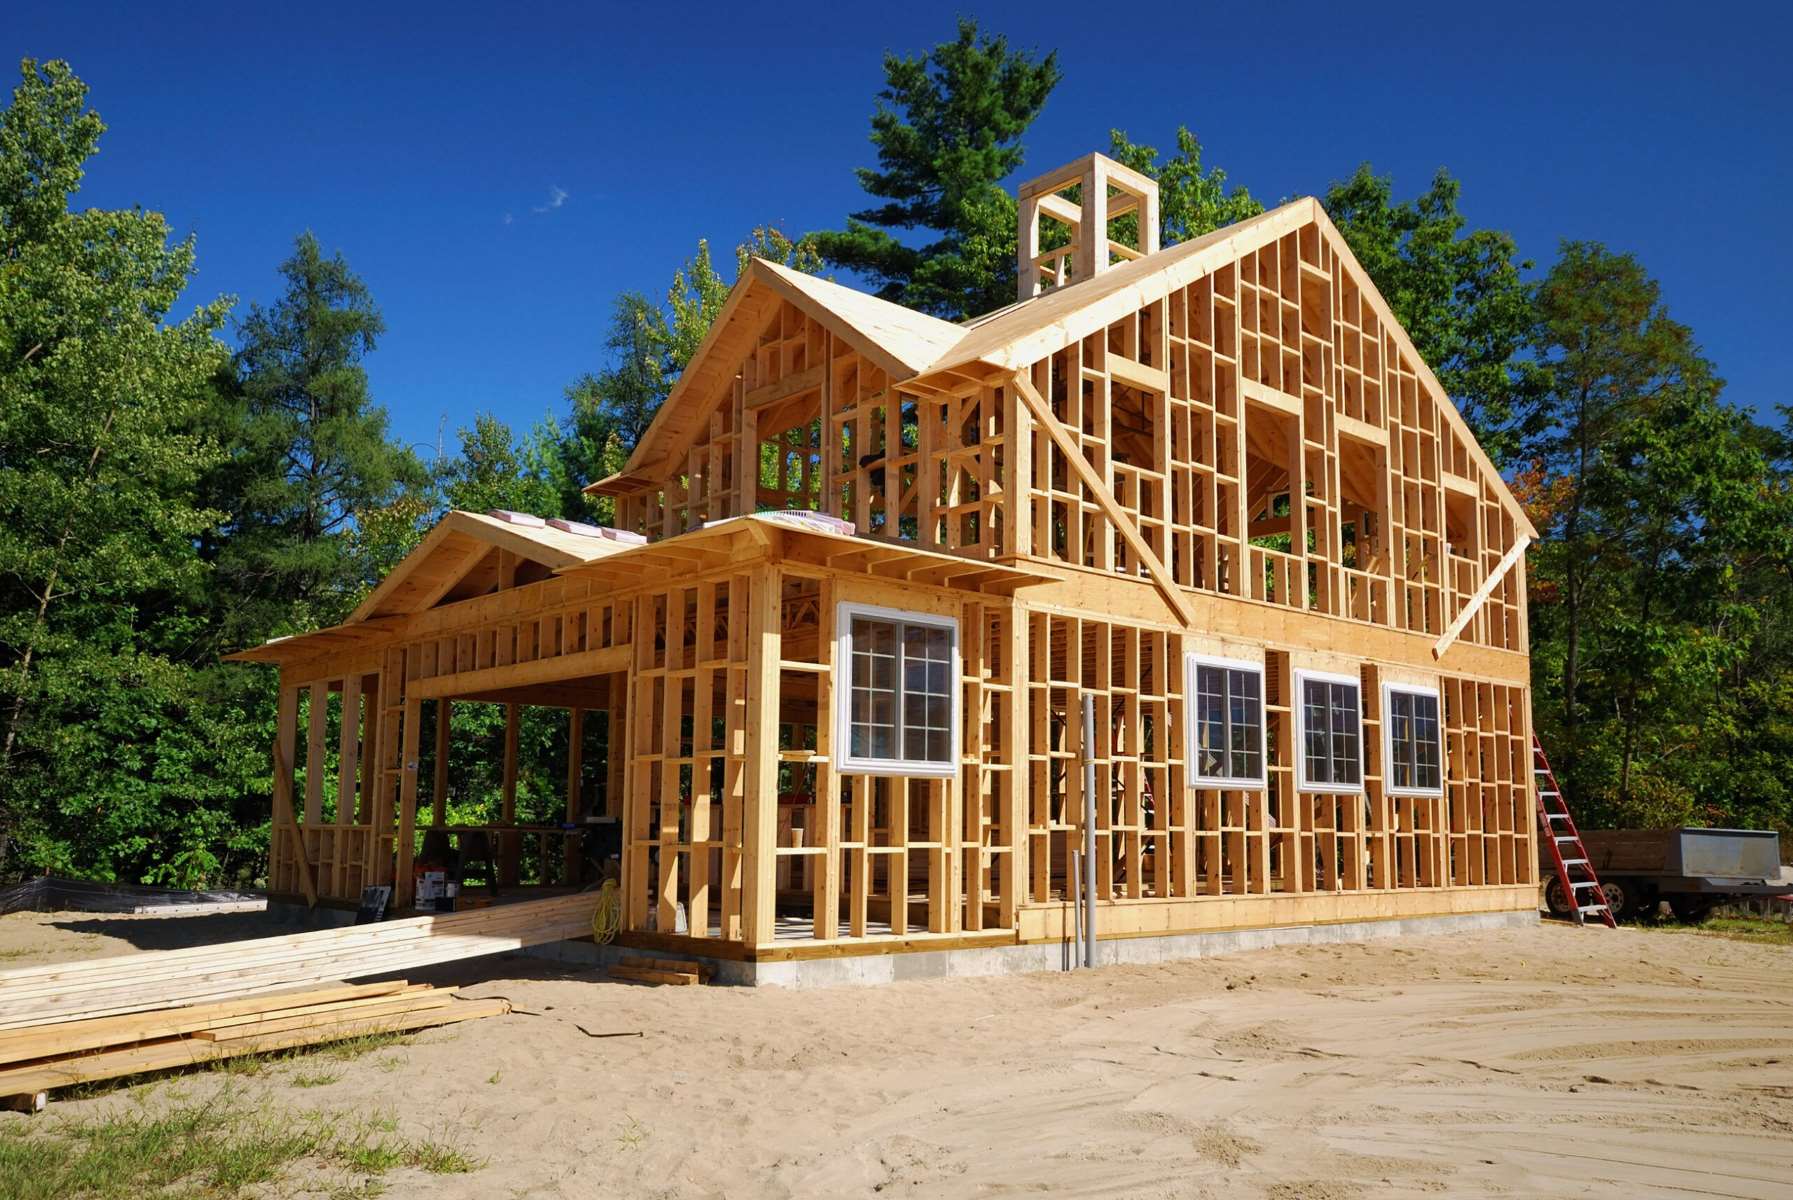 Build A House On Your Land Without Permits Or Permission – No Rules, No Limits!